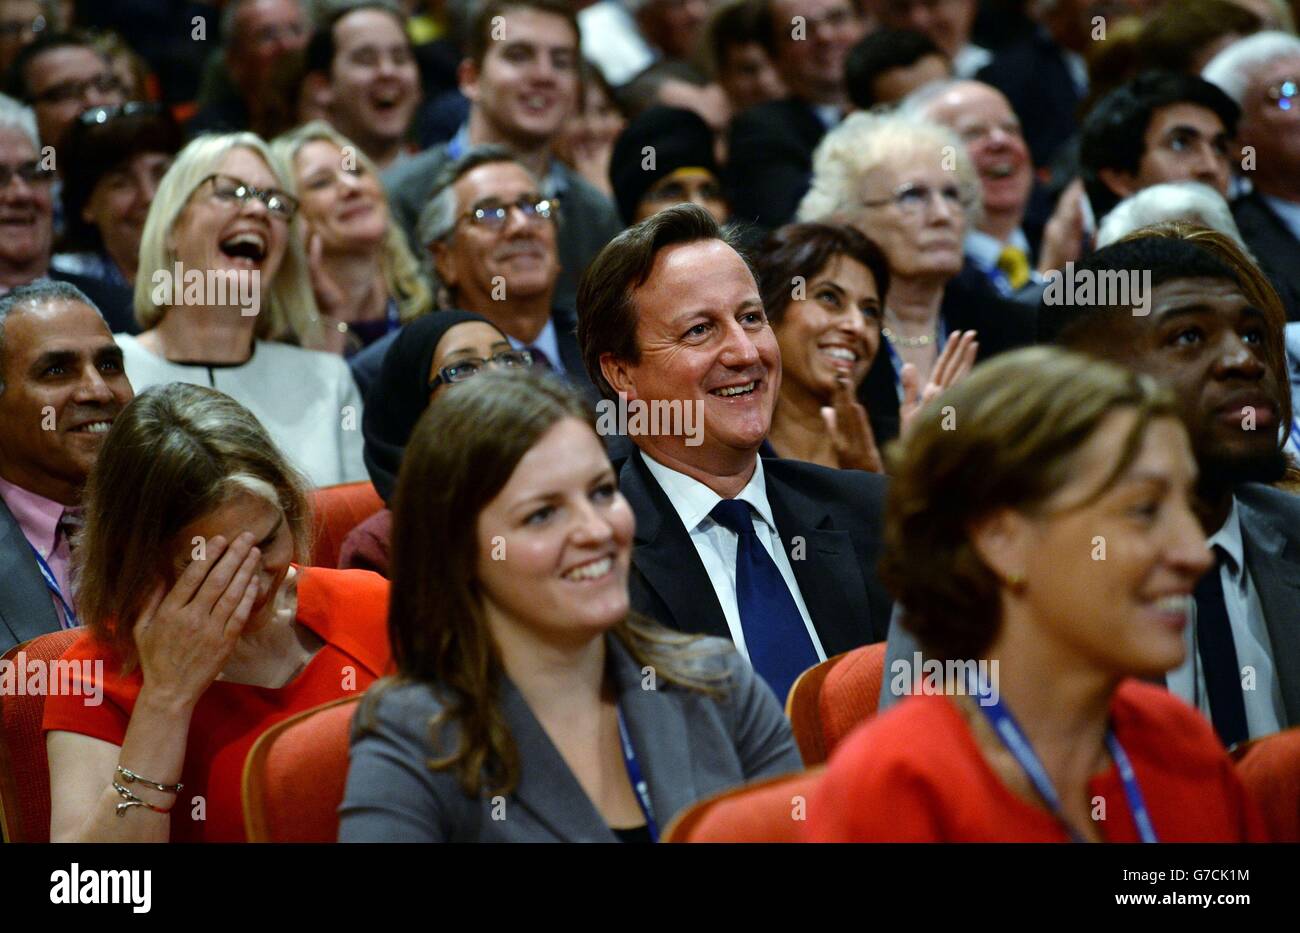 Prime Minister David Cameron watches Mayor of London Boris making his speech to delegates at the Conservative Party annual conference in the International Convention Centre, Birmingham. Stock Photo